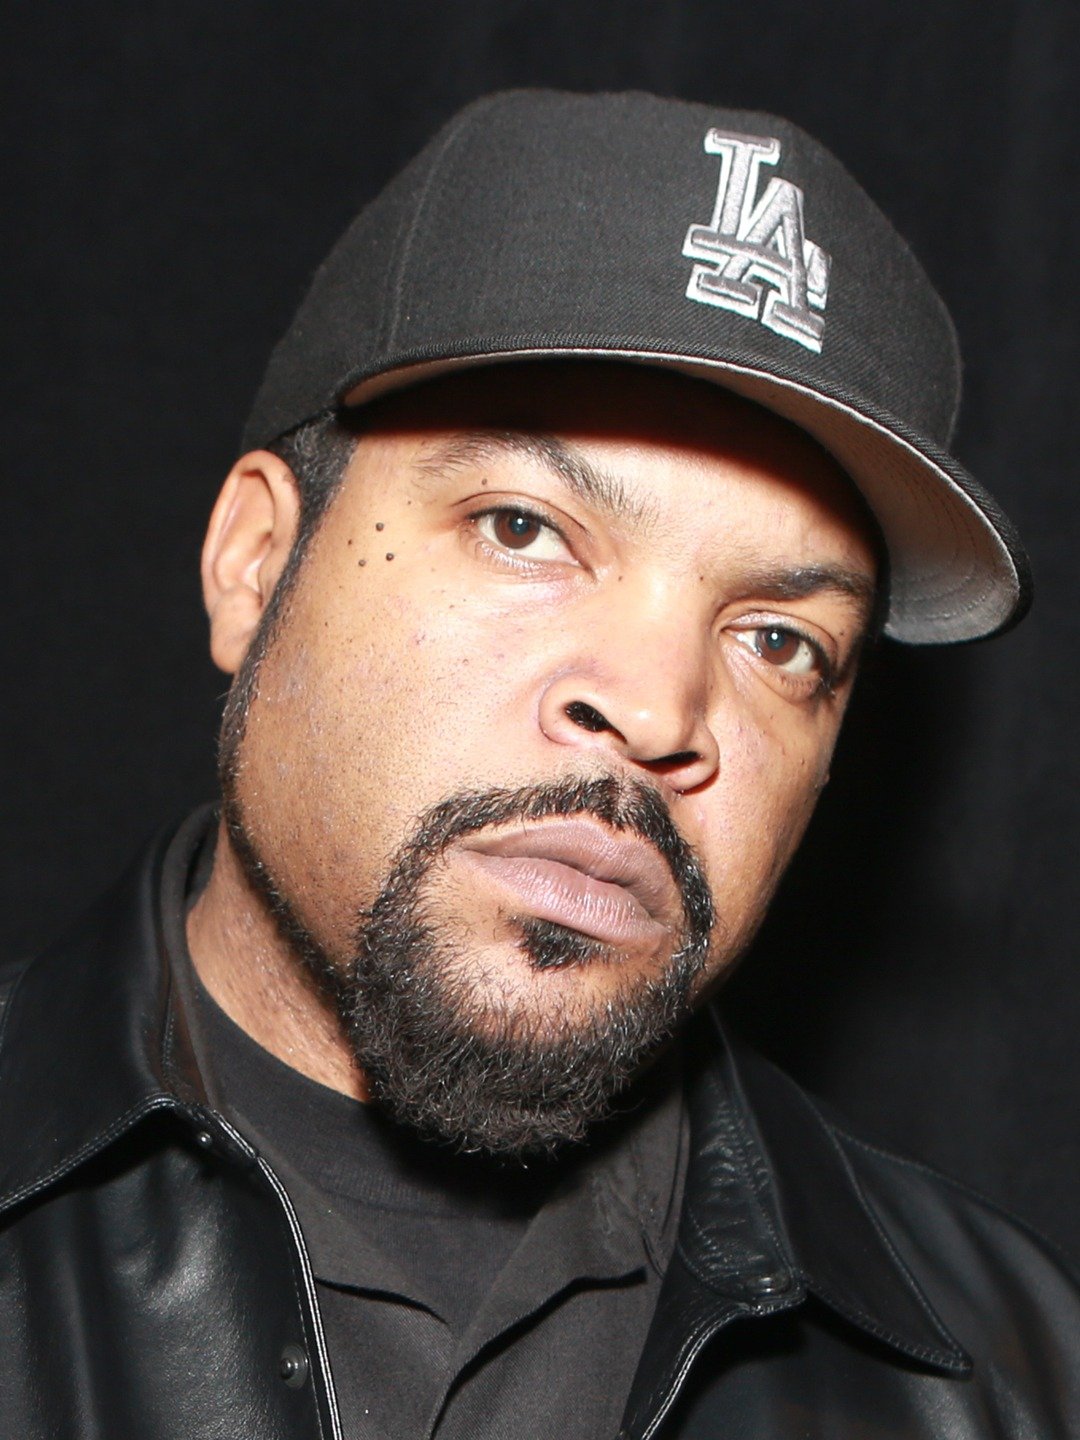 how tall is ice cube